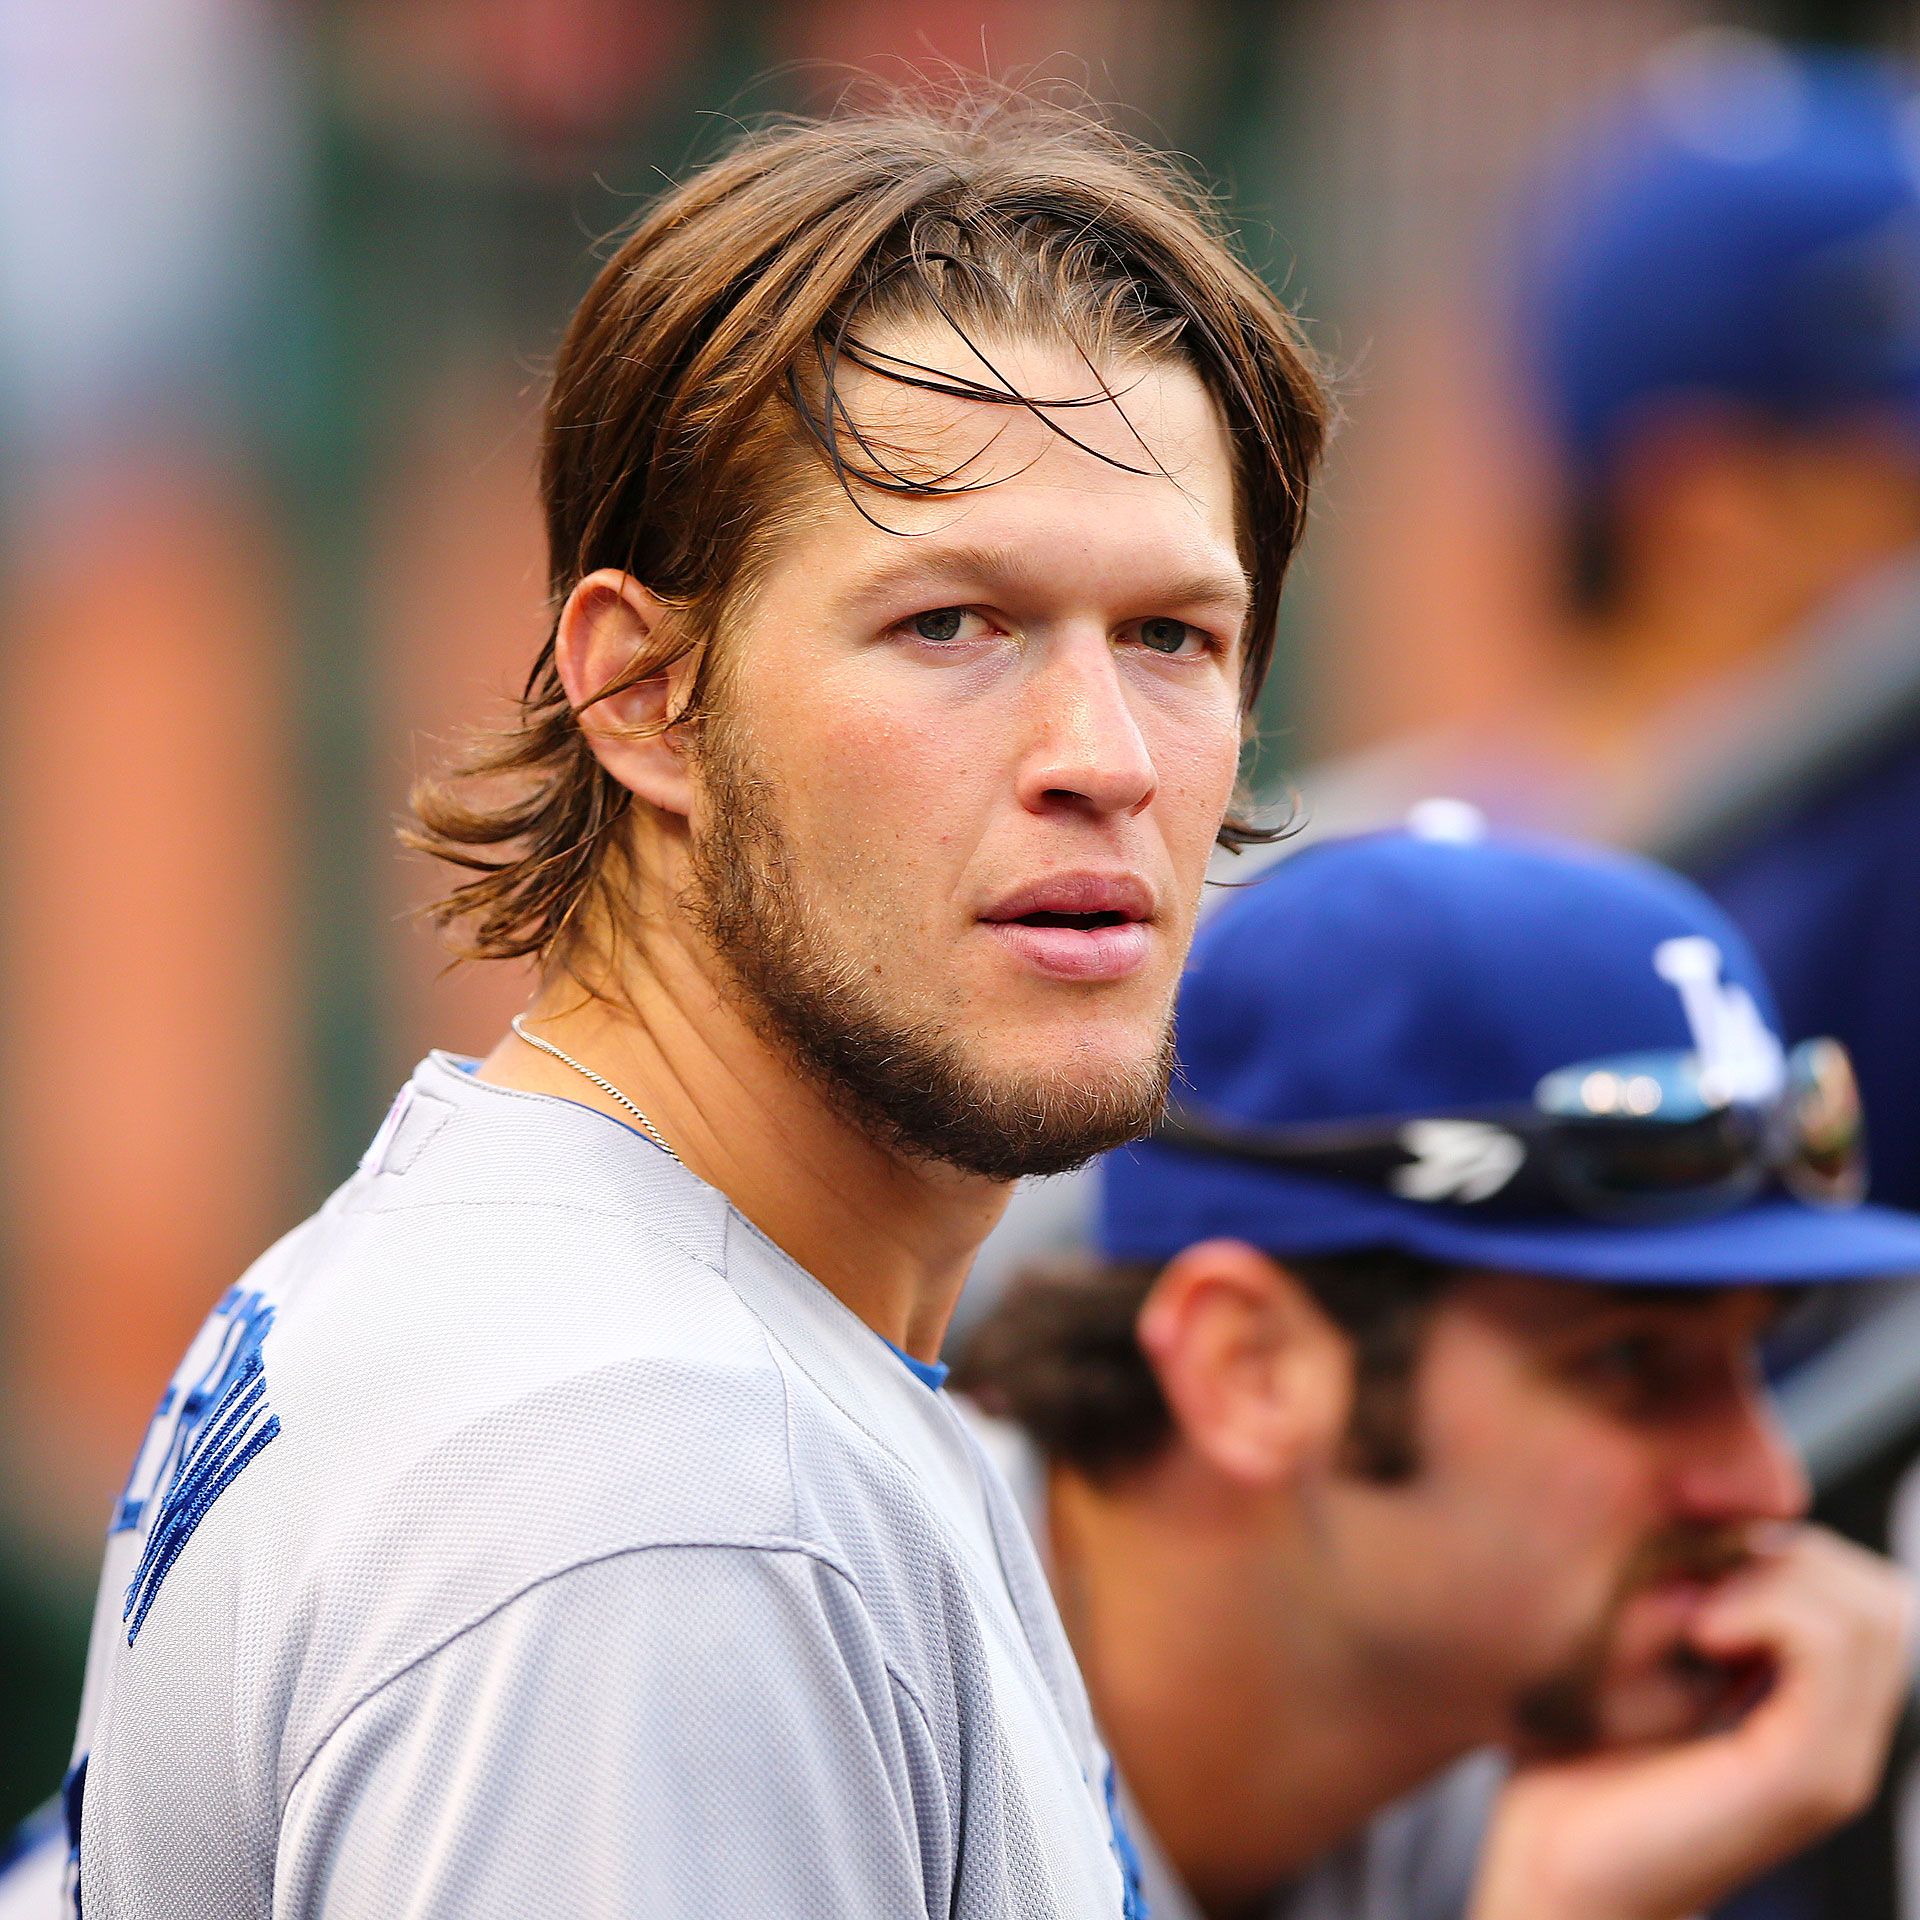 Clayton Kershaw of the Los Angeles Dodgers files for salary arbitration